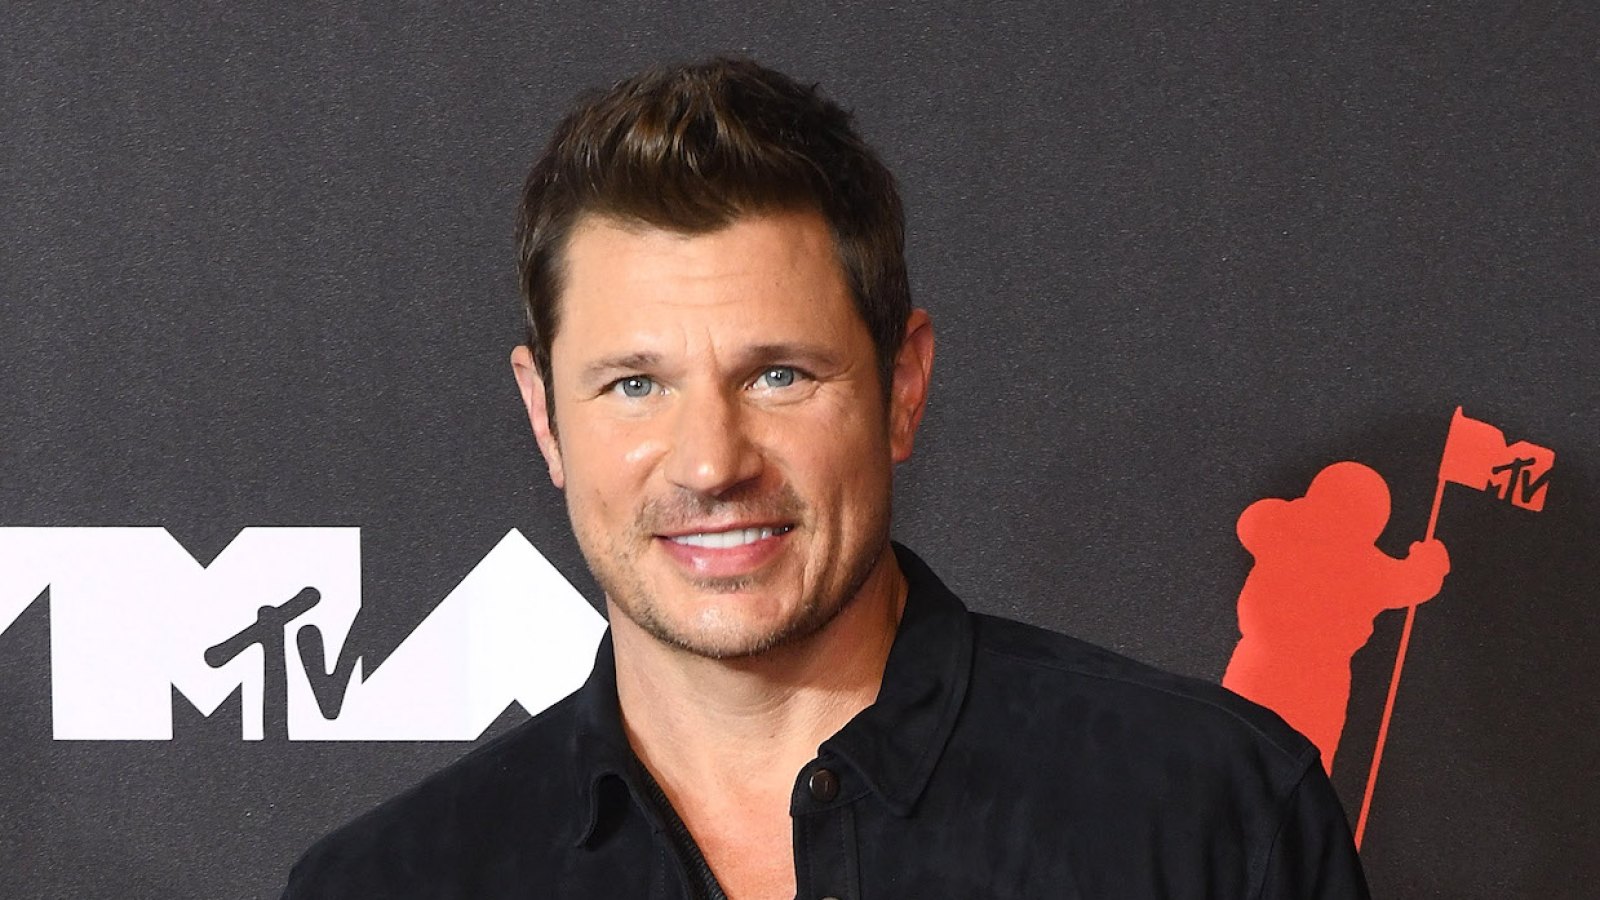 Nick Lachey All Smiles on 1st TV Appearance Amid Legal Drama